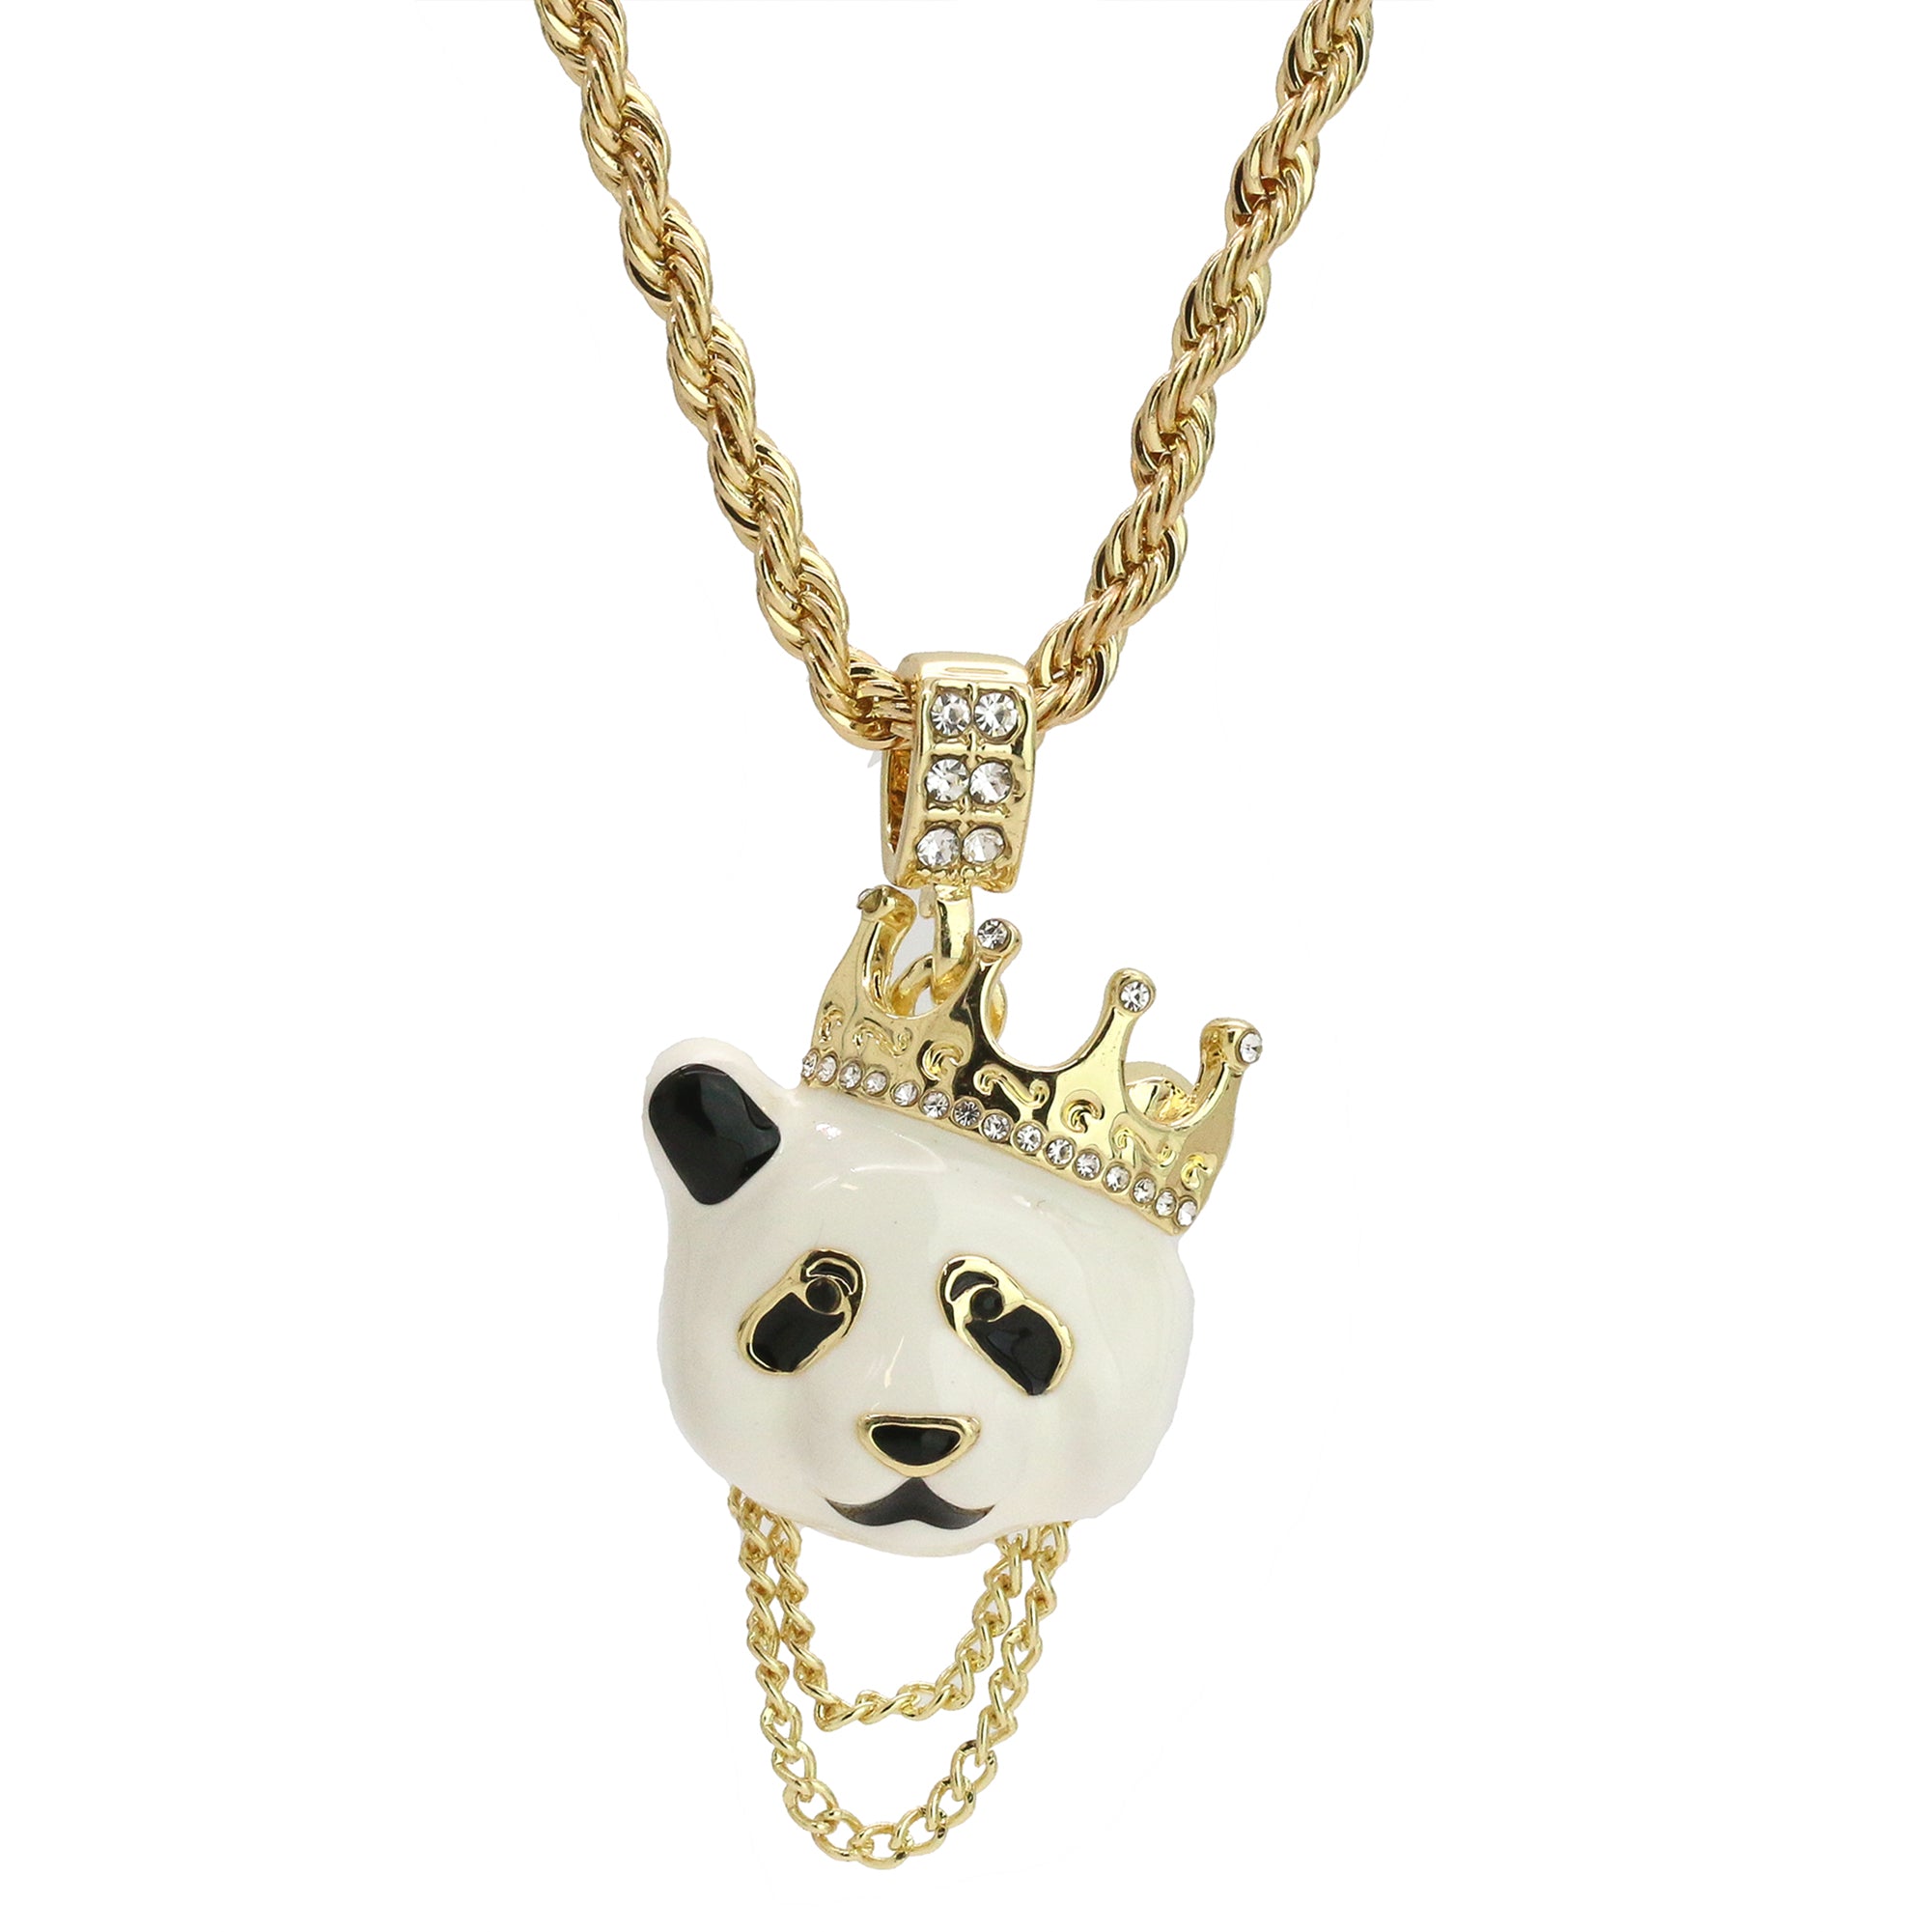 Cz Crown Chain Panda Pendant 24" Rope Chain Hip Hop 18k Jewelry Necklace